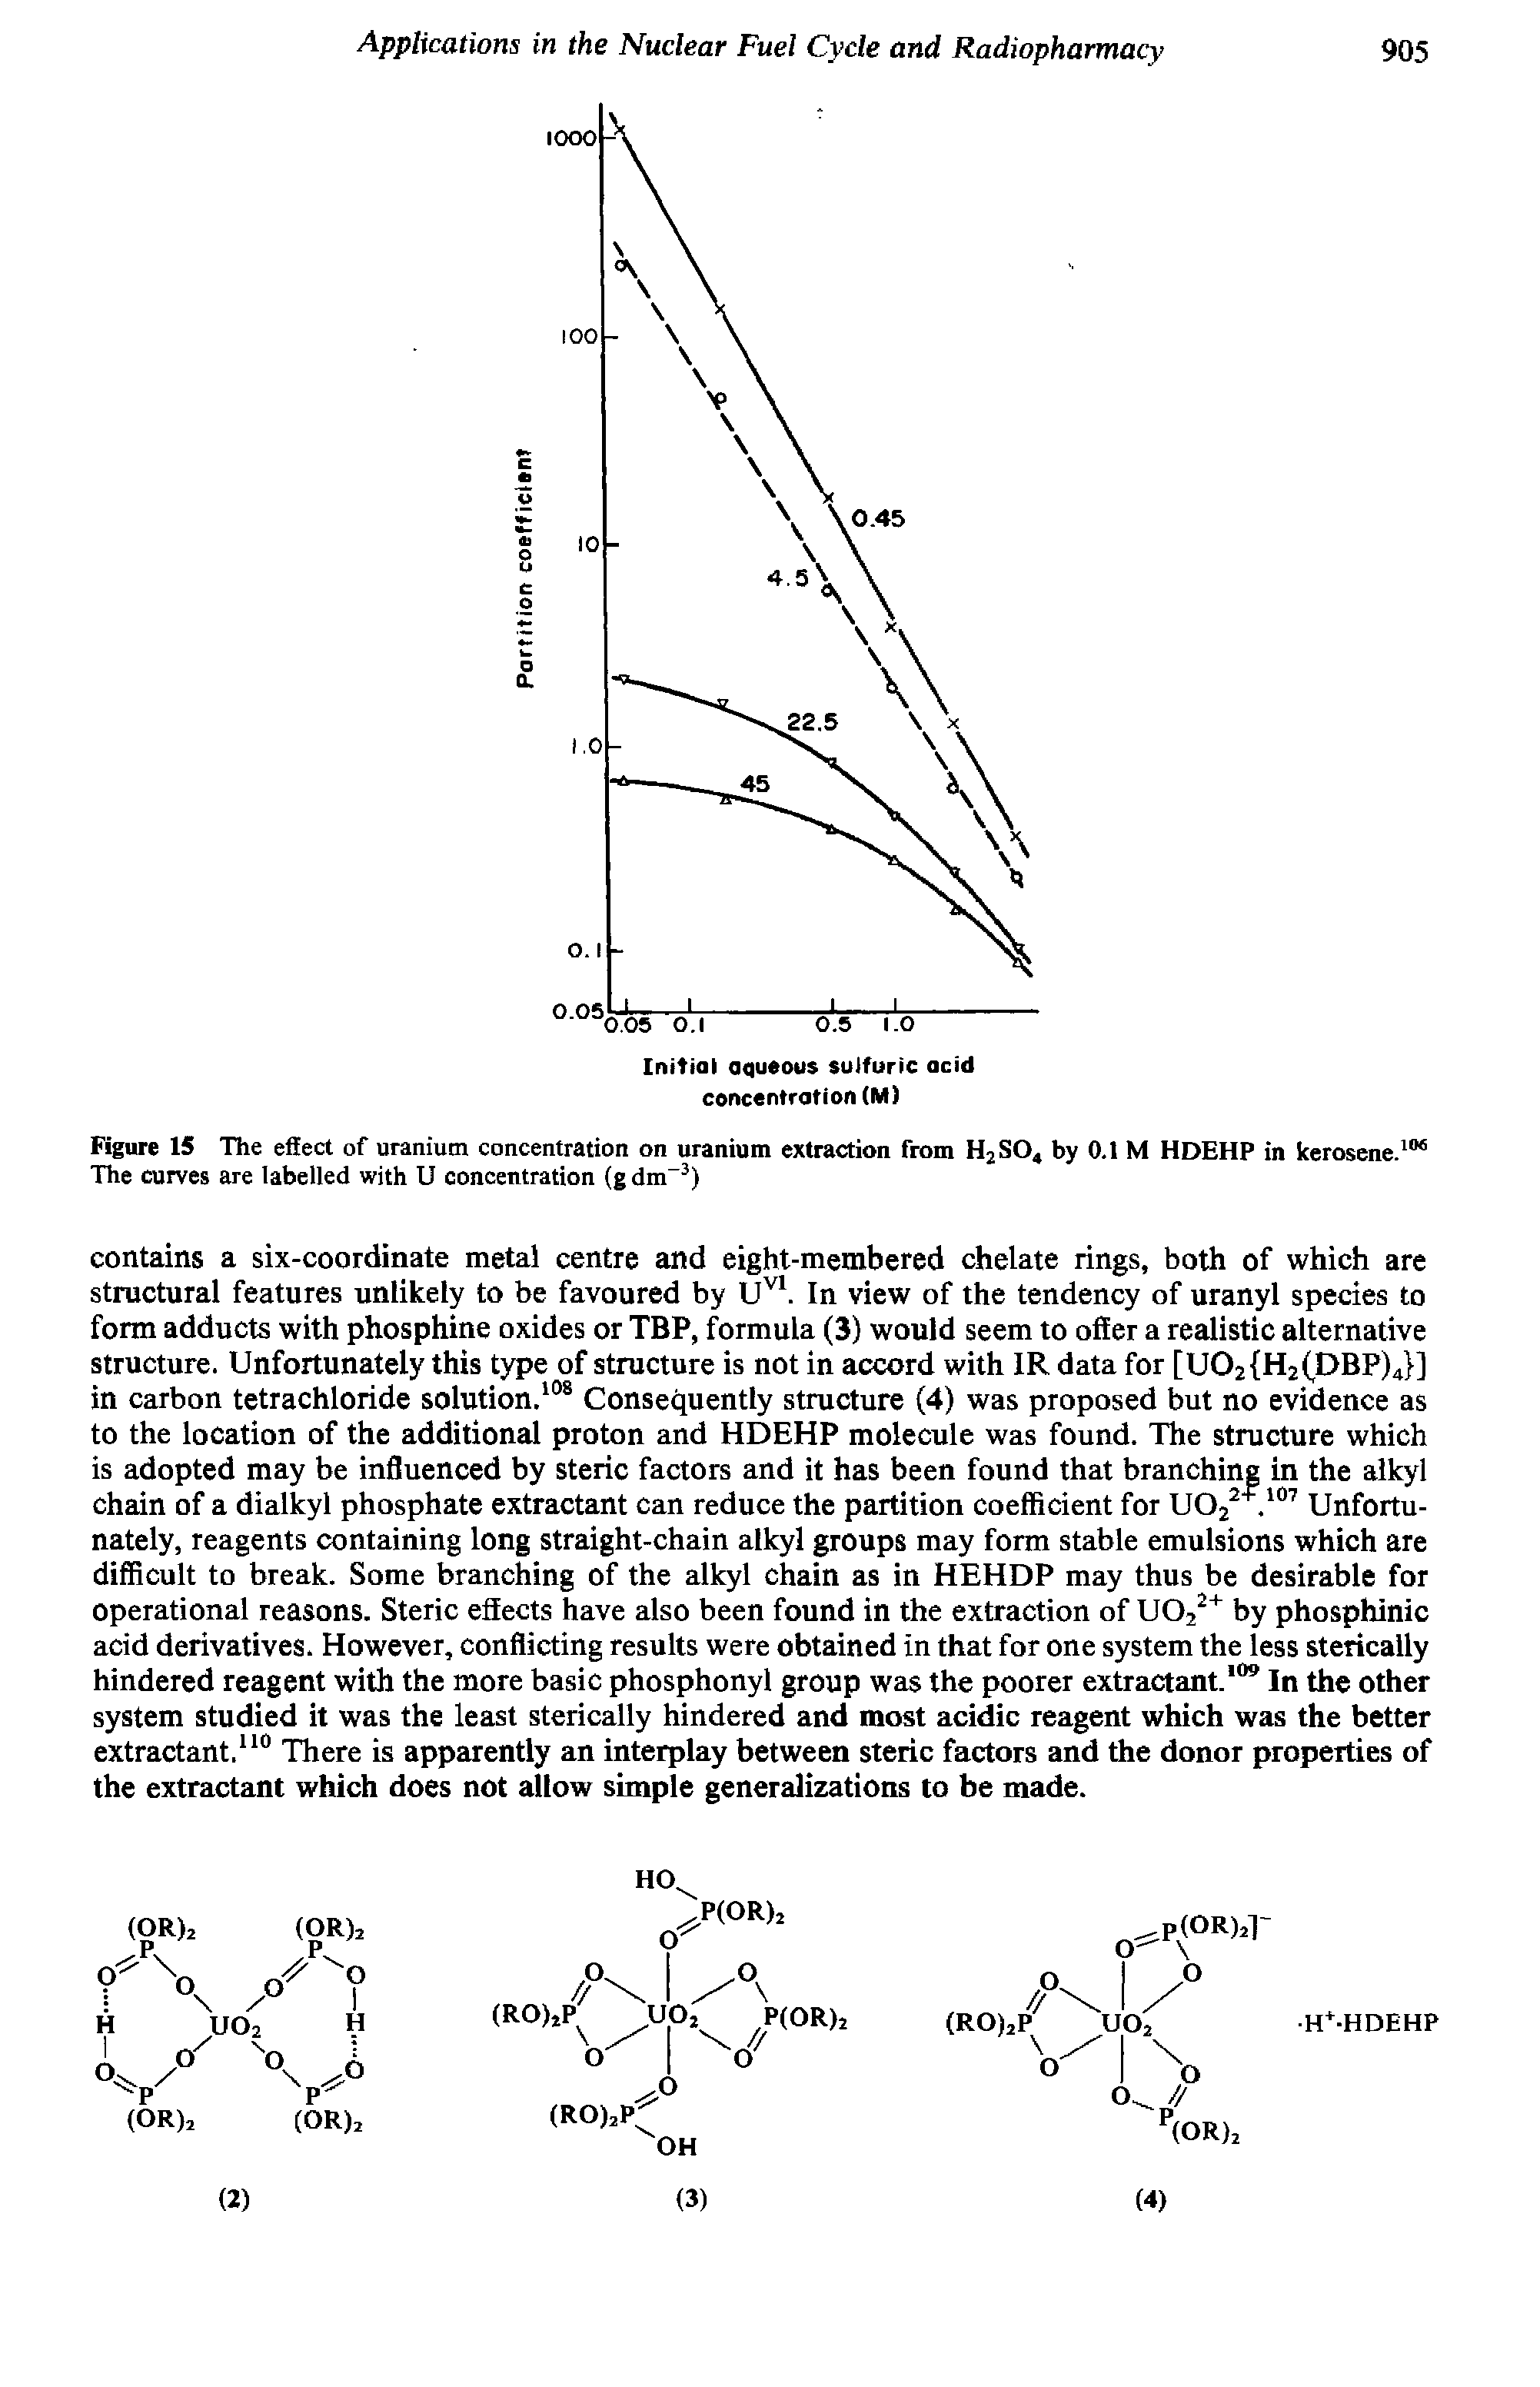 Figure 15 The effect of uranium concentration on uranium extraction from H2S04 by 0.1 M HDEHP in kerosene.106 The curves are labelled with U concentration (g dm-3)...